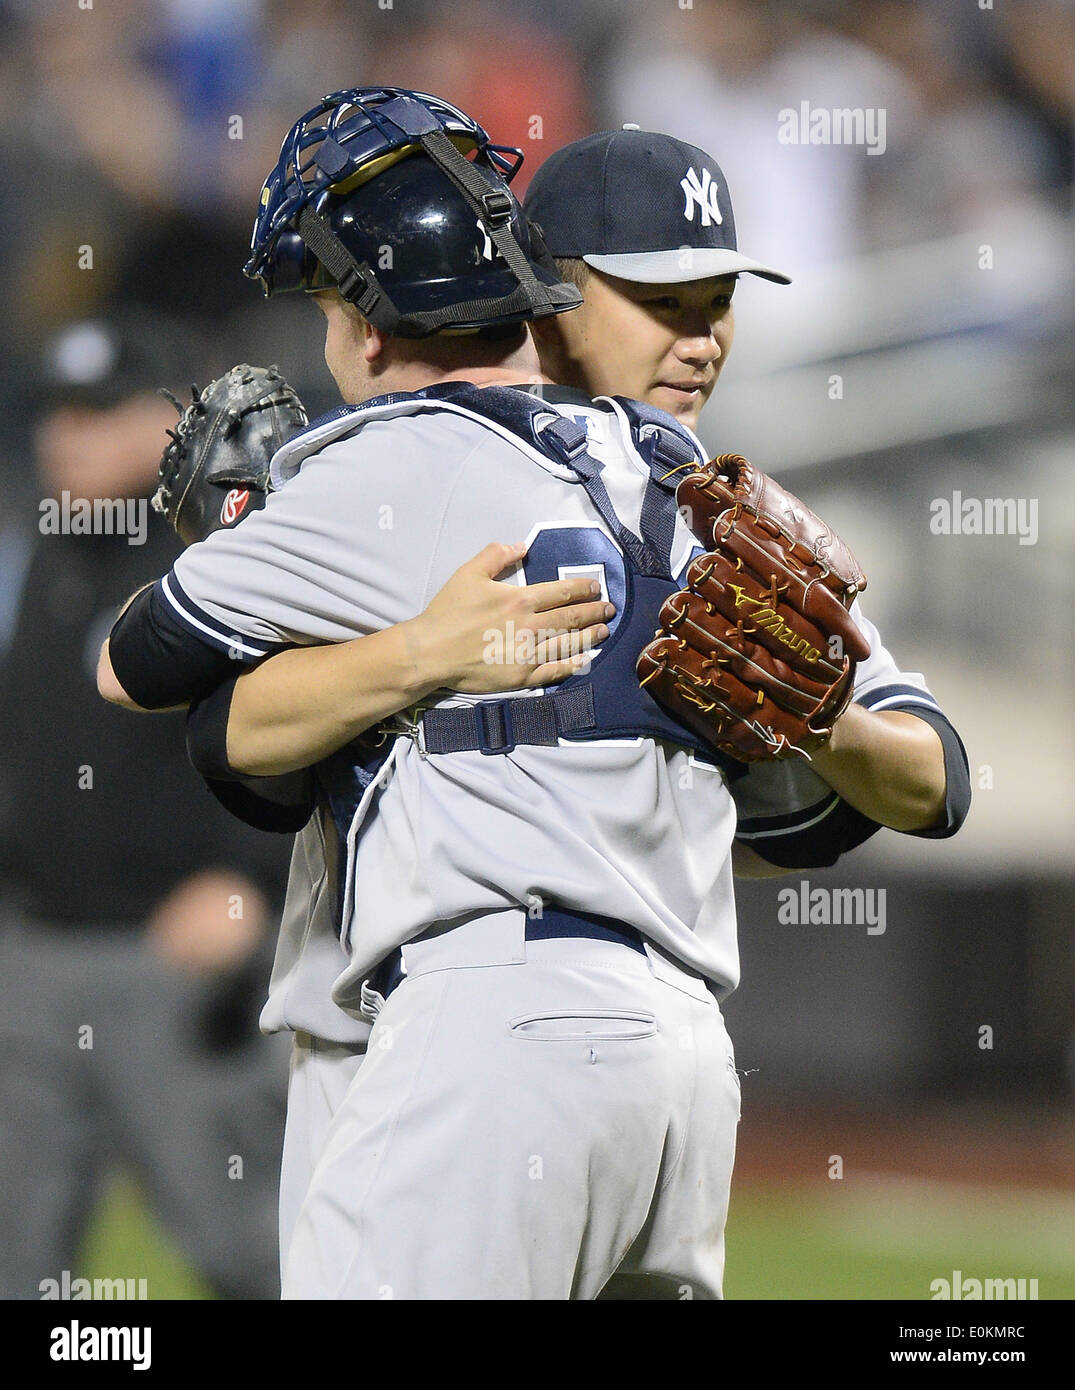 Flushing, New York, USA. 14th May, 2014. (F-B) Brian McCann, Masahiro Tanaka (Yankees) MLB : Pitcher Masahiro Tanaka of the New York Yankees celebrates his sixth win with his first shutout in the MLB with catcher Brian McCann after the Major League Baseball game against the New York Mets at Citi Field in Flushing, New York, United States . Credit:  AFLO/Alamy Live News Stock Photo